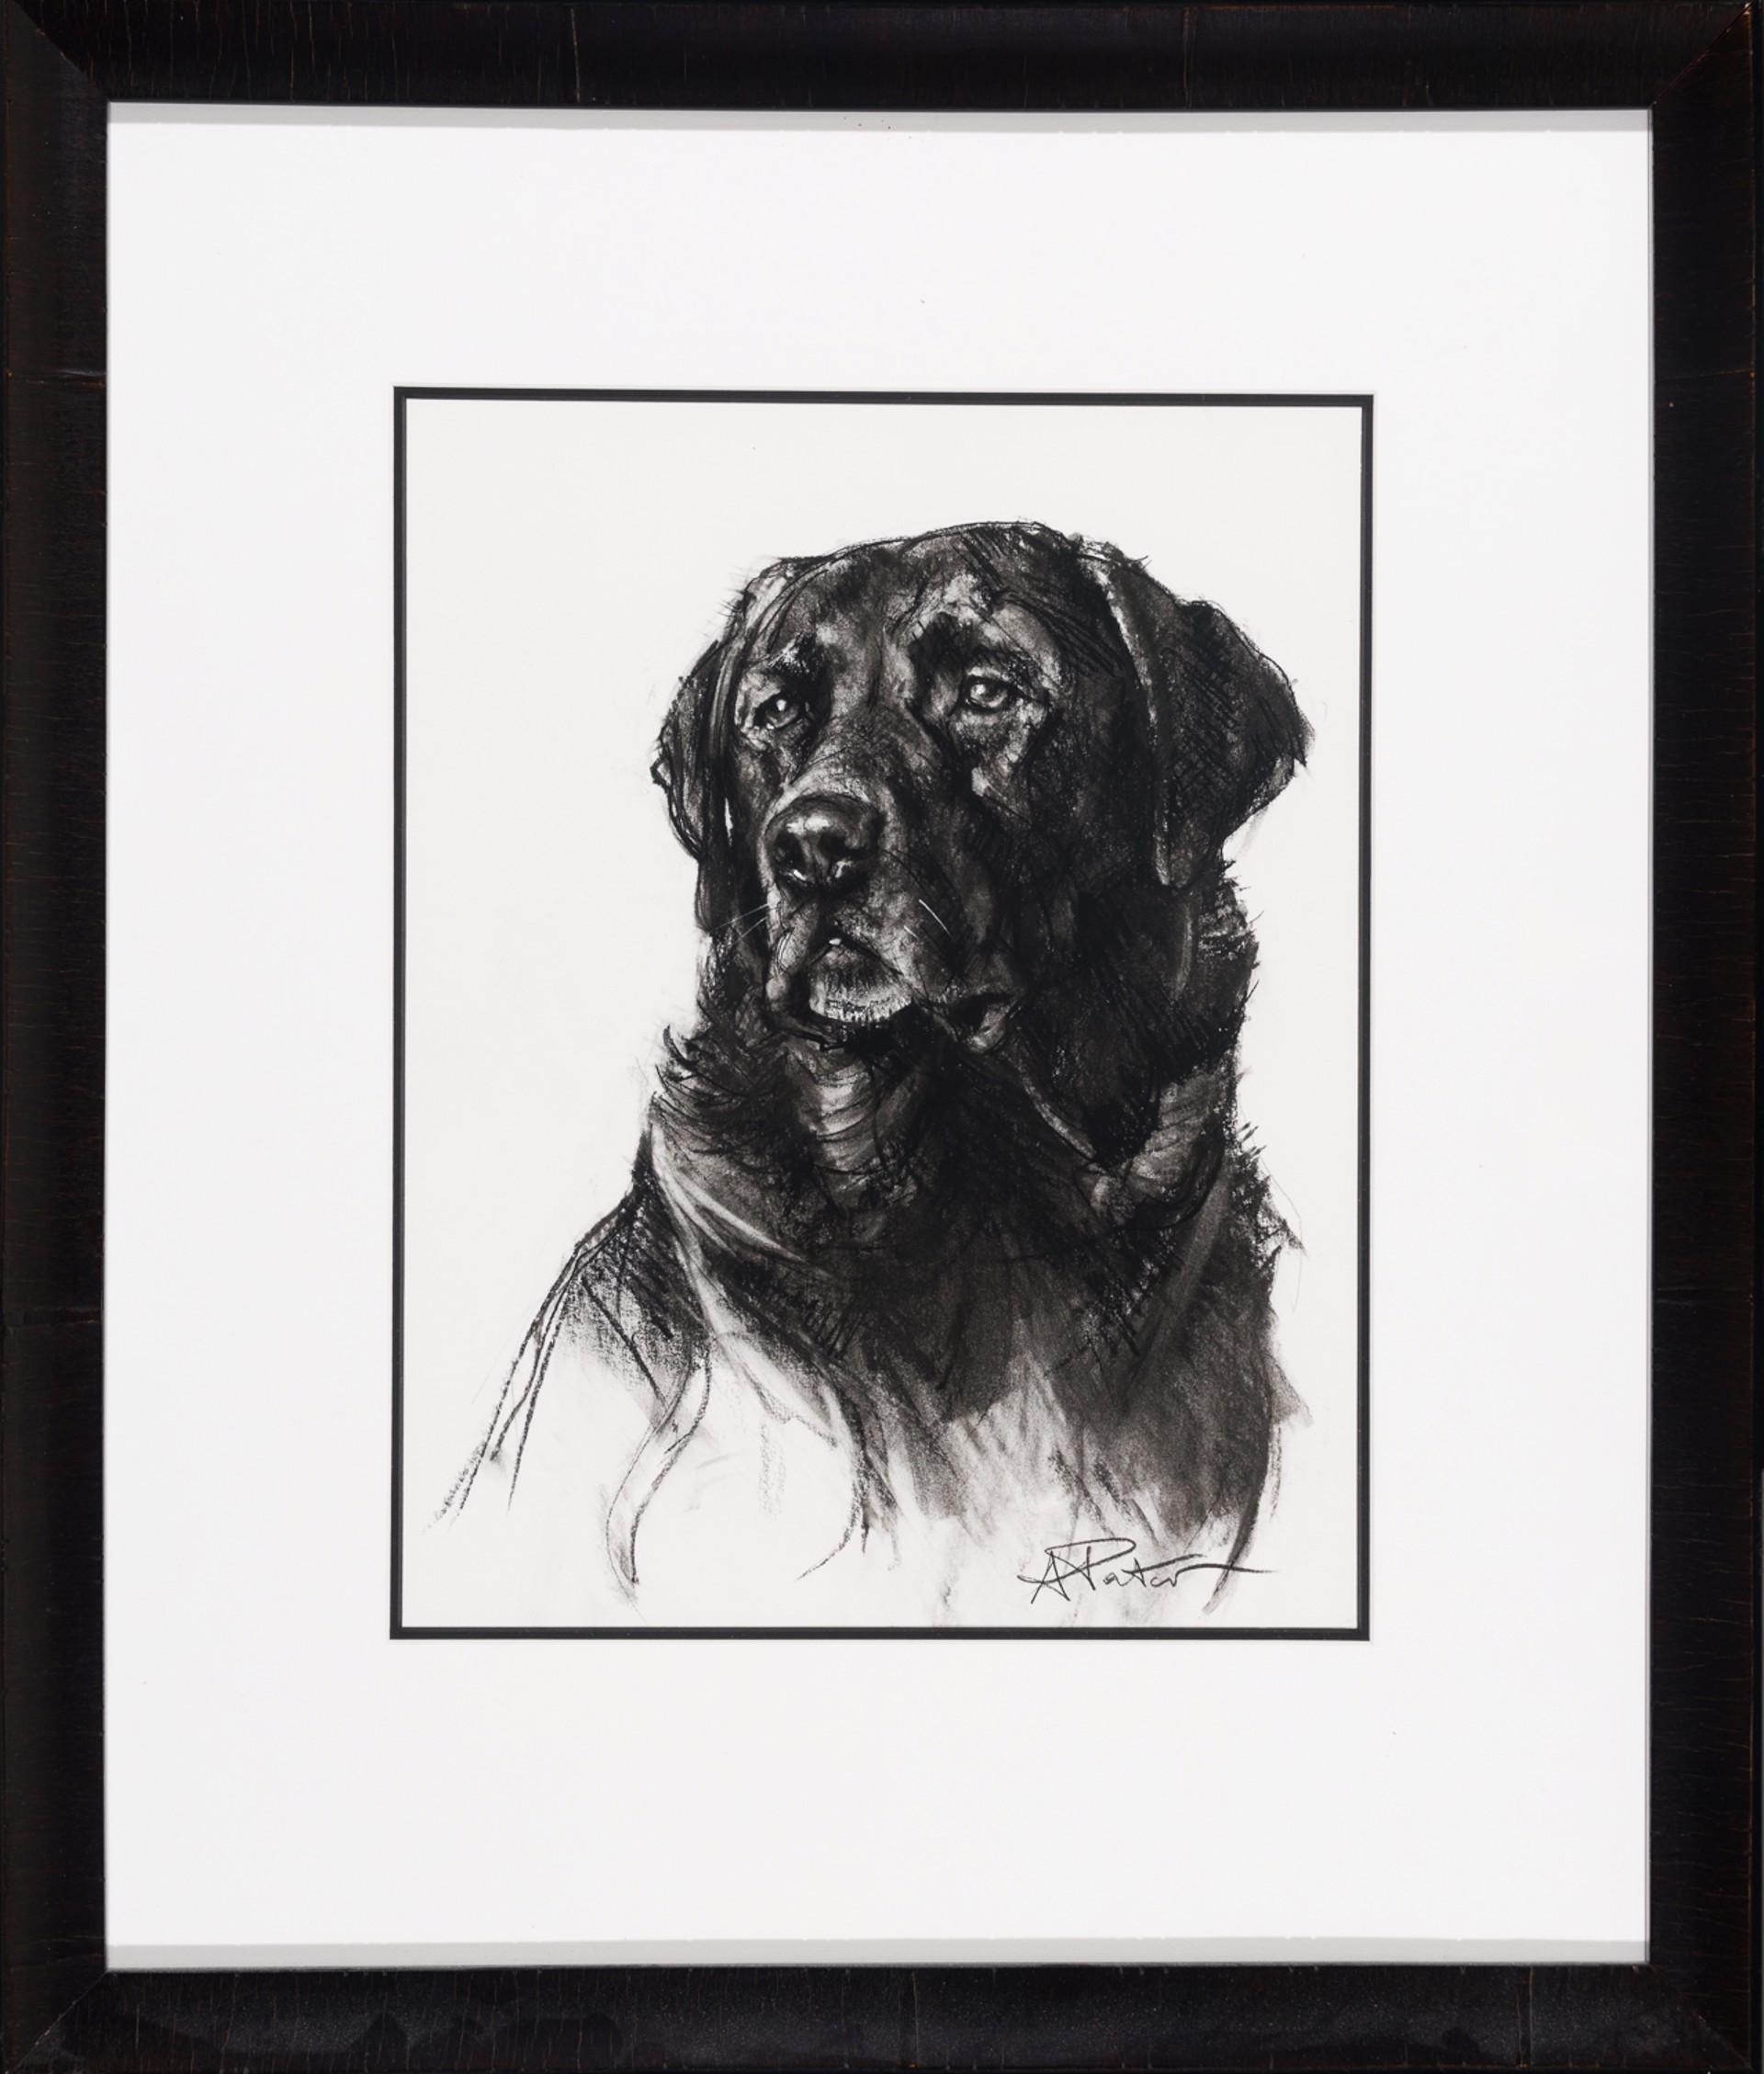 BLACK LAB STUDY by Andre Pater